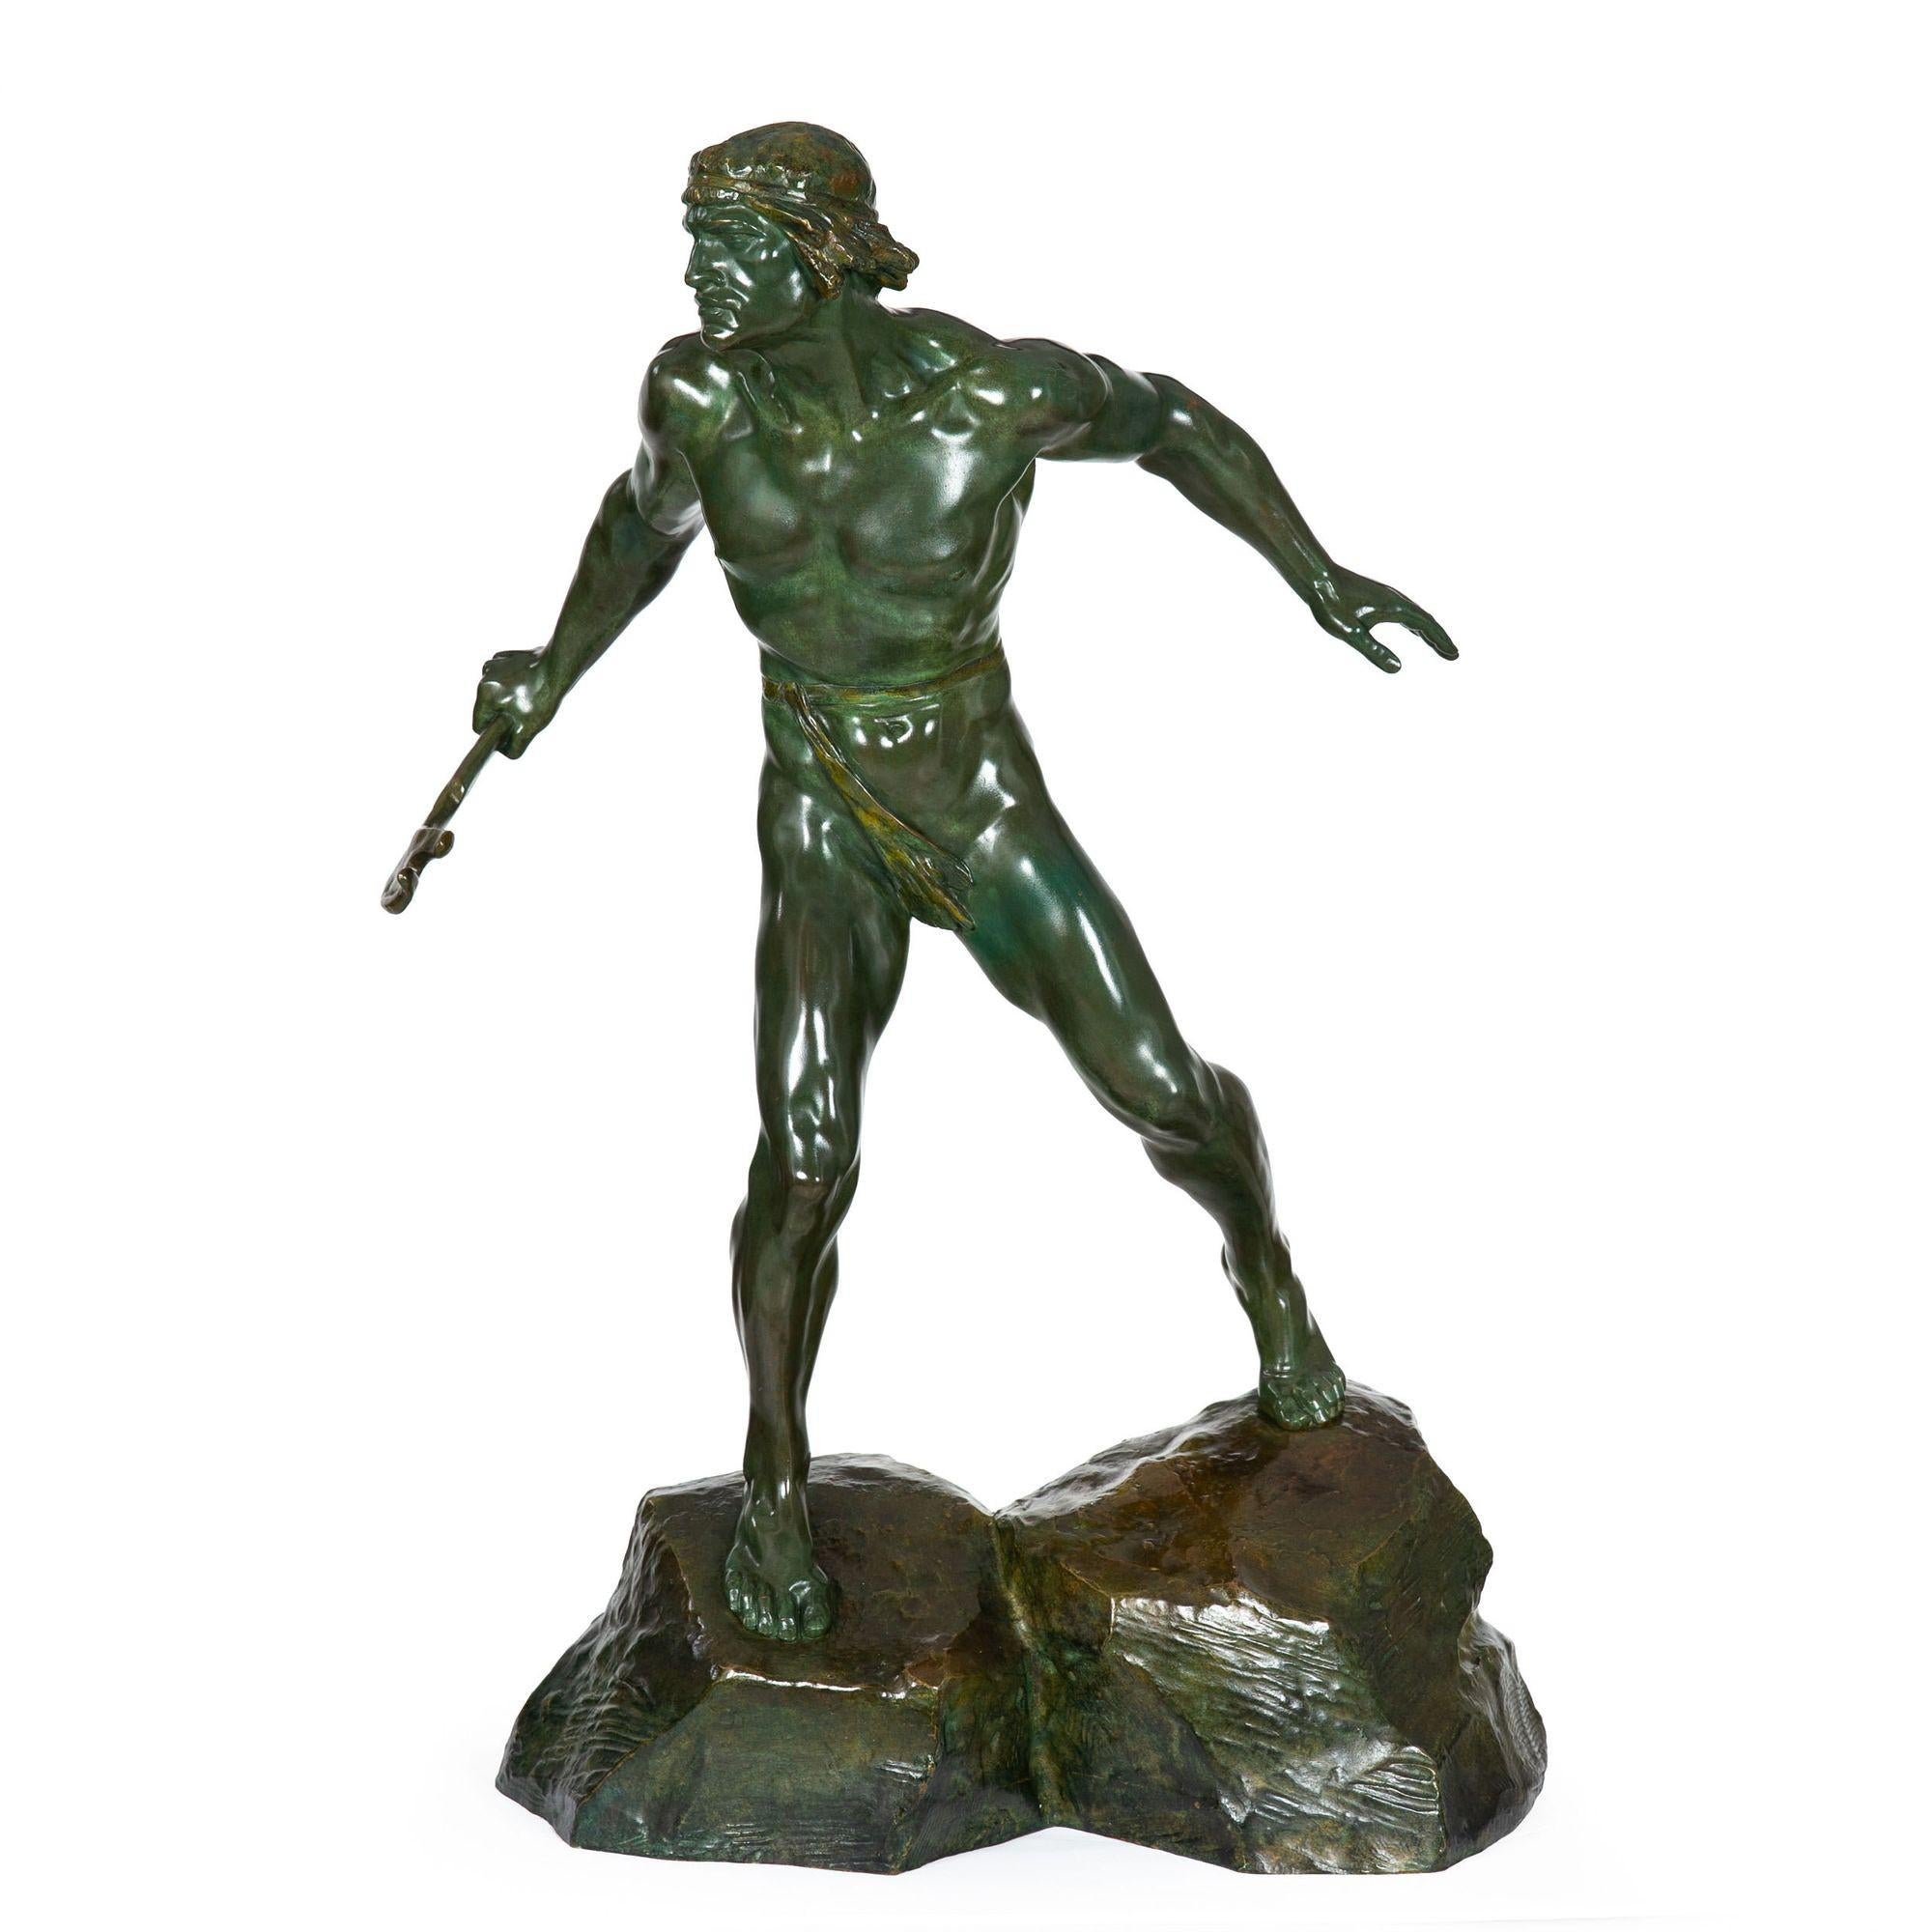 ERNEST CHARLES DIOSI
French, 1881-1959

Model of a Standing Warrior

Patinated bronze  signed in cast 